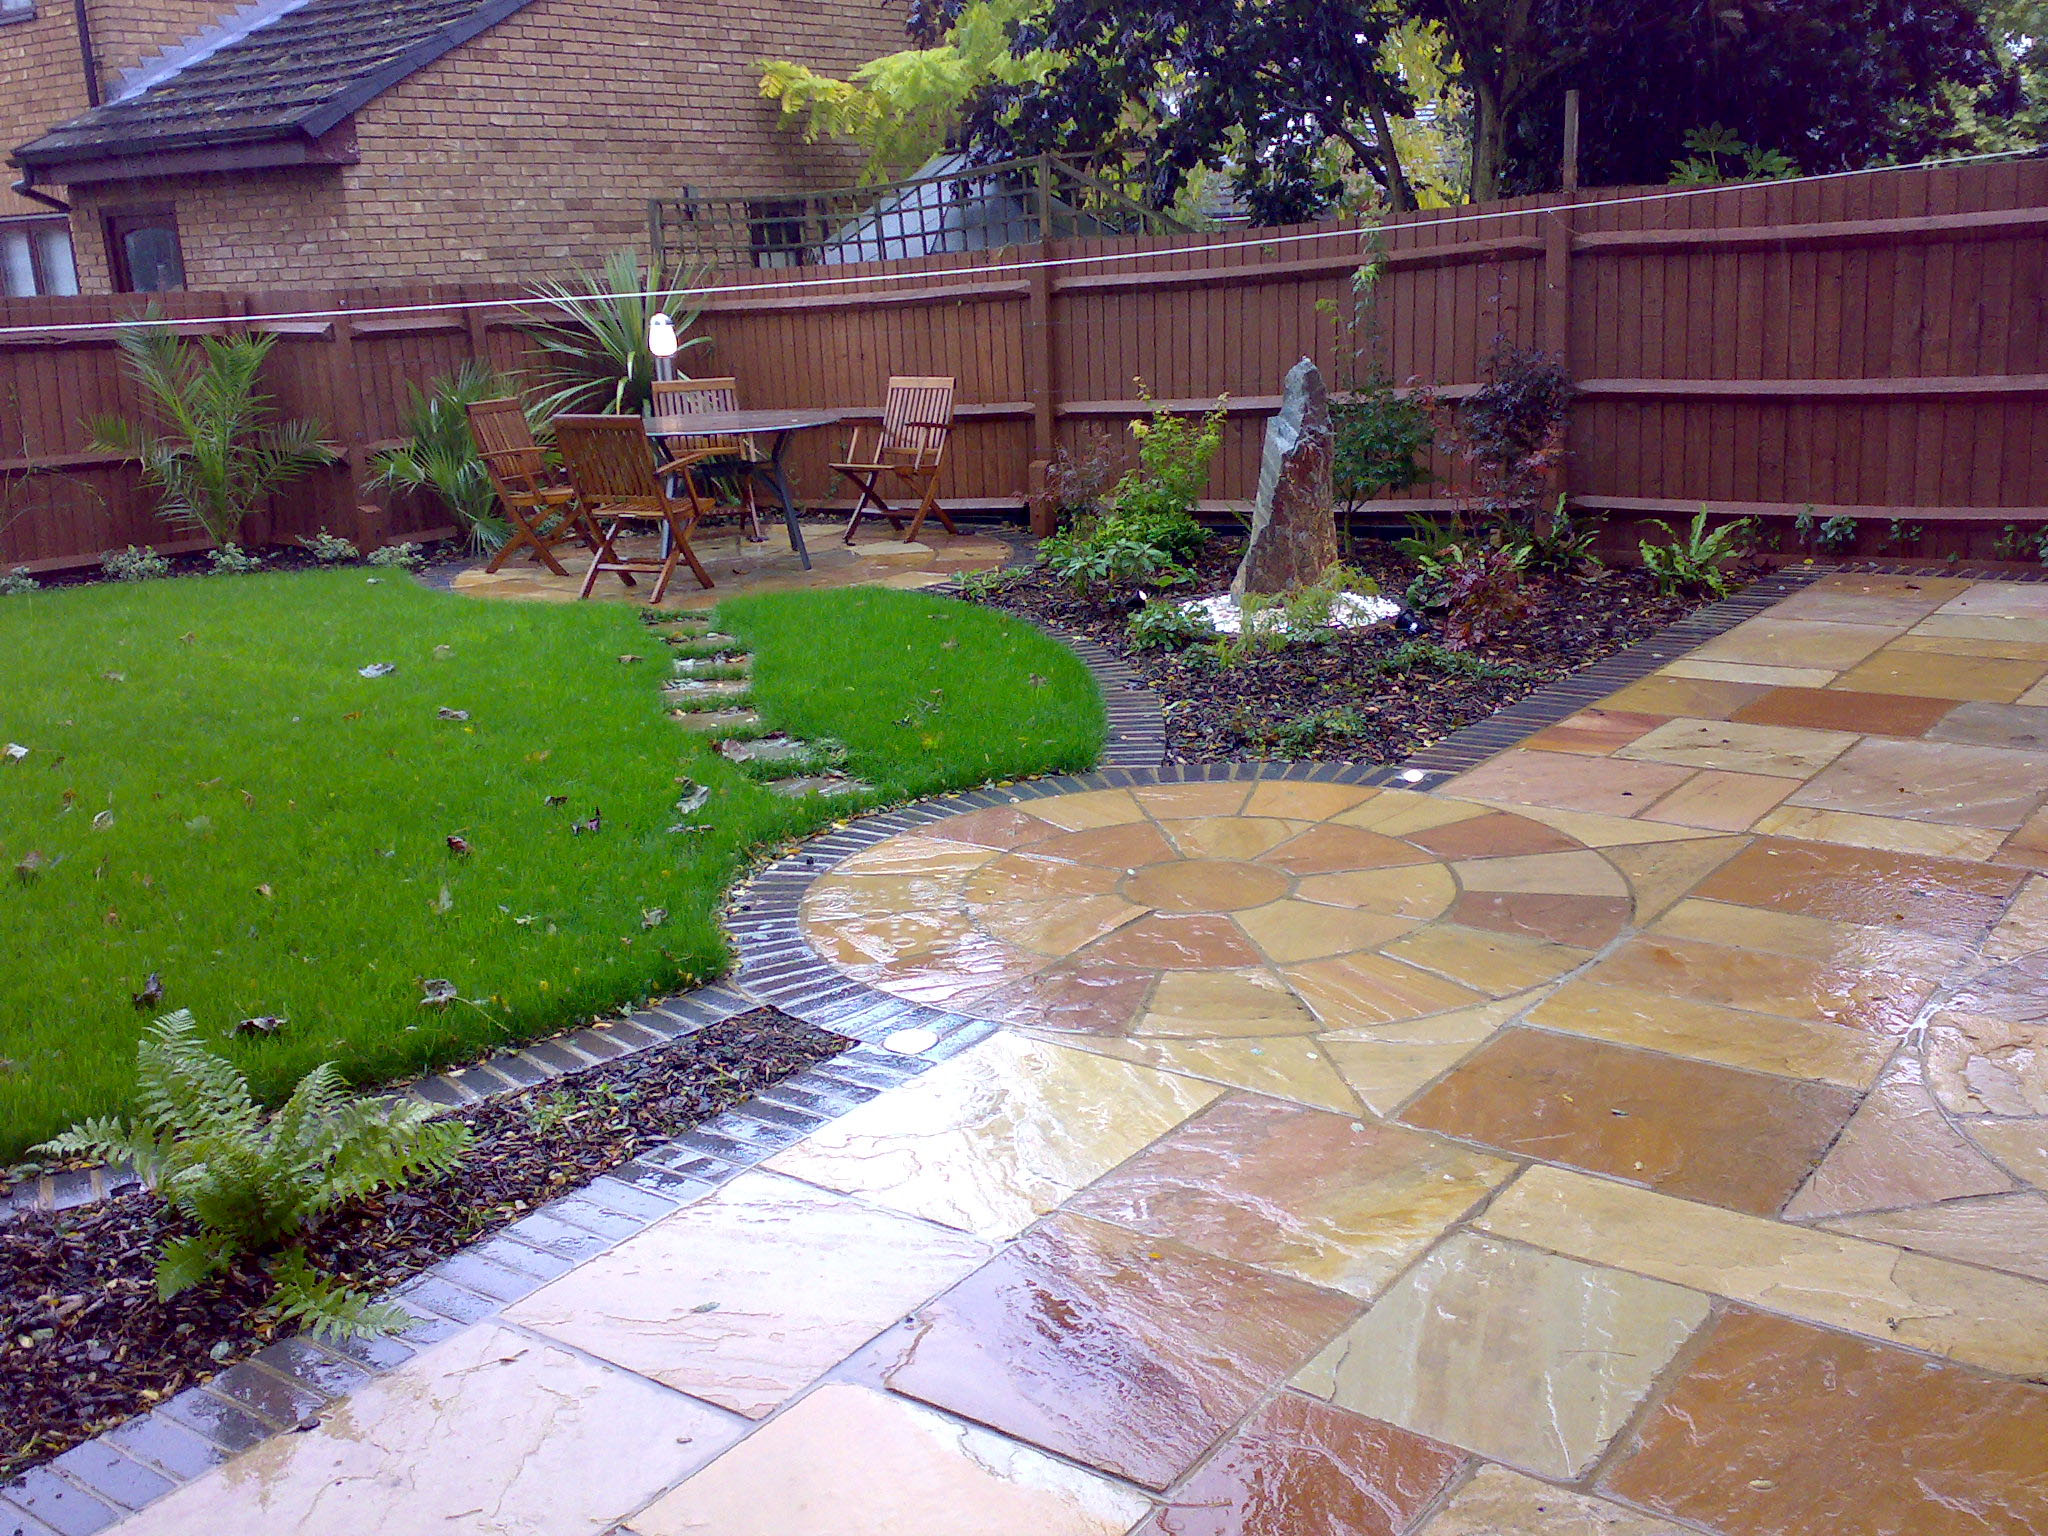 View into the garden looking at the circular seating area with glossy caramel colour new patio in the foreground